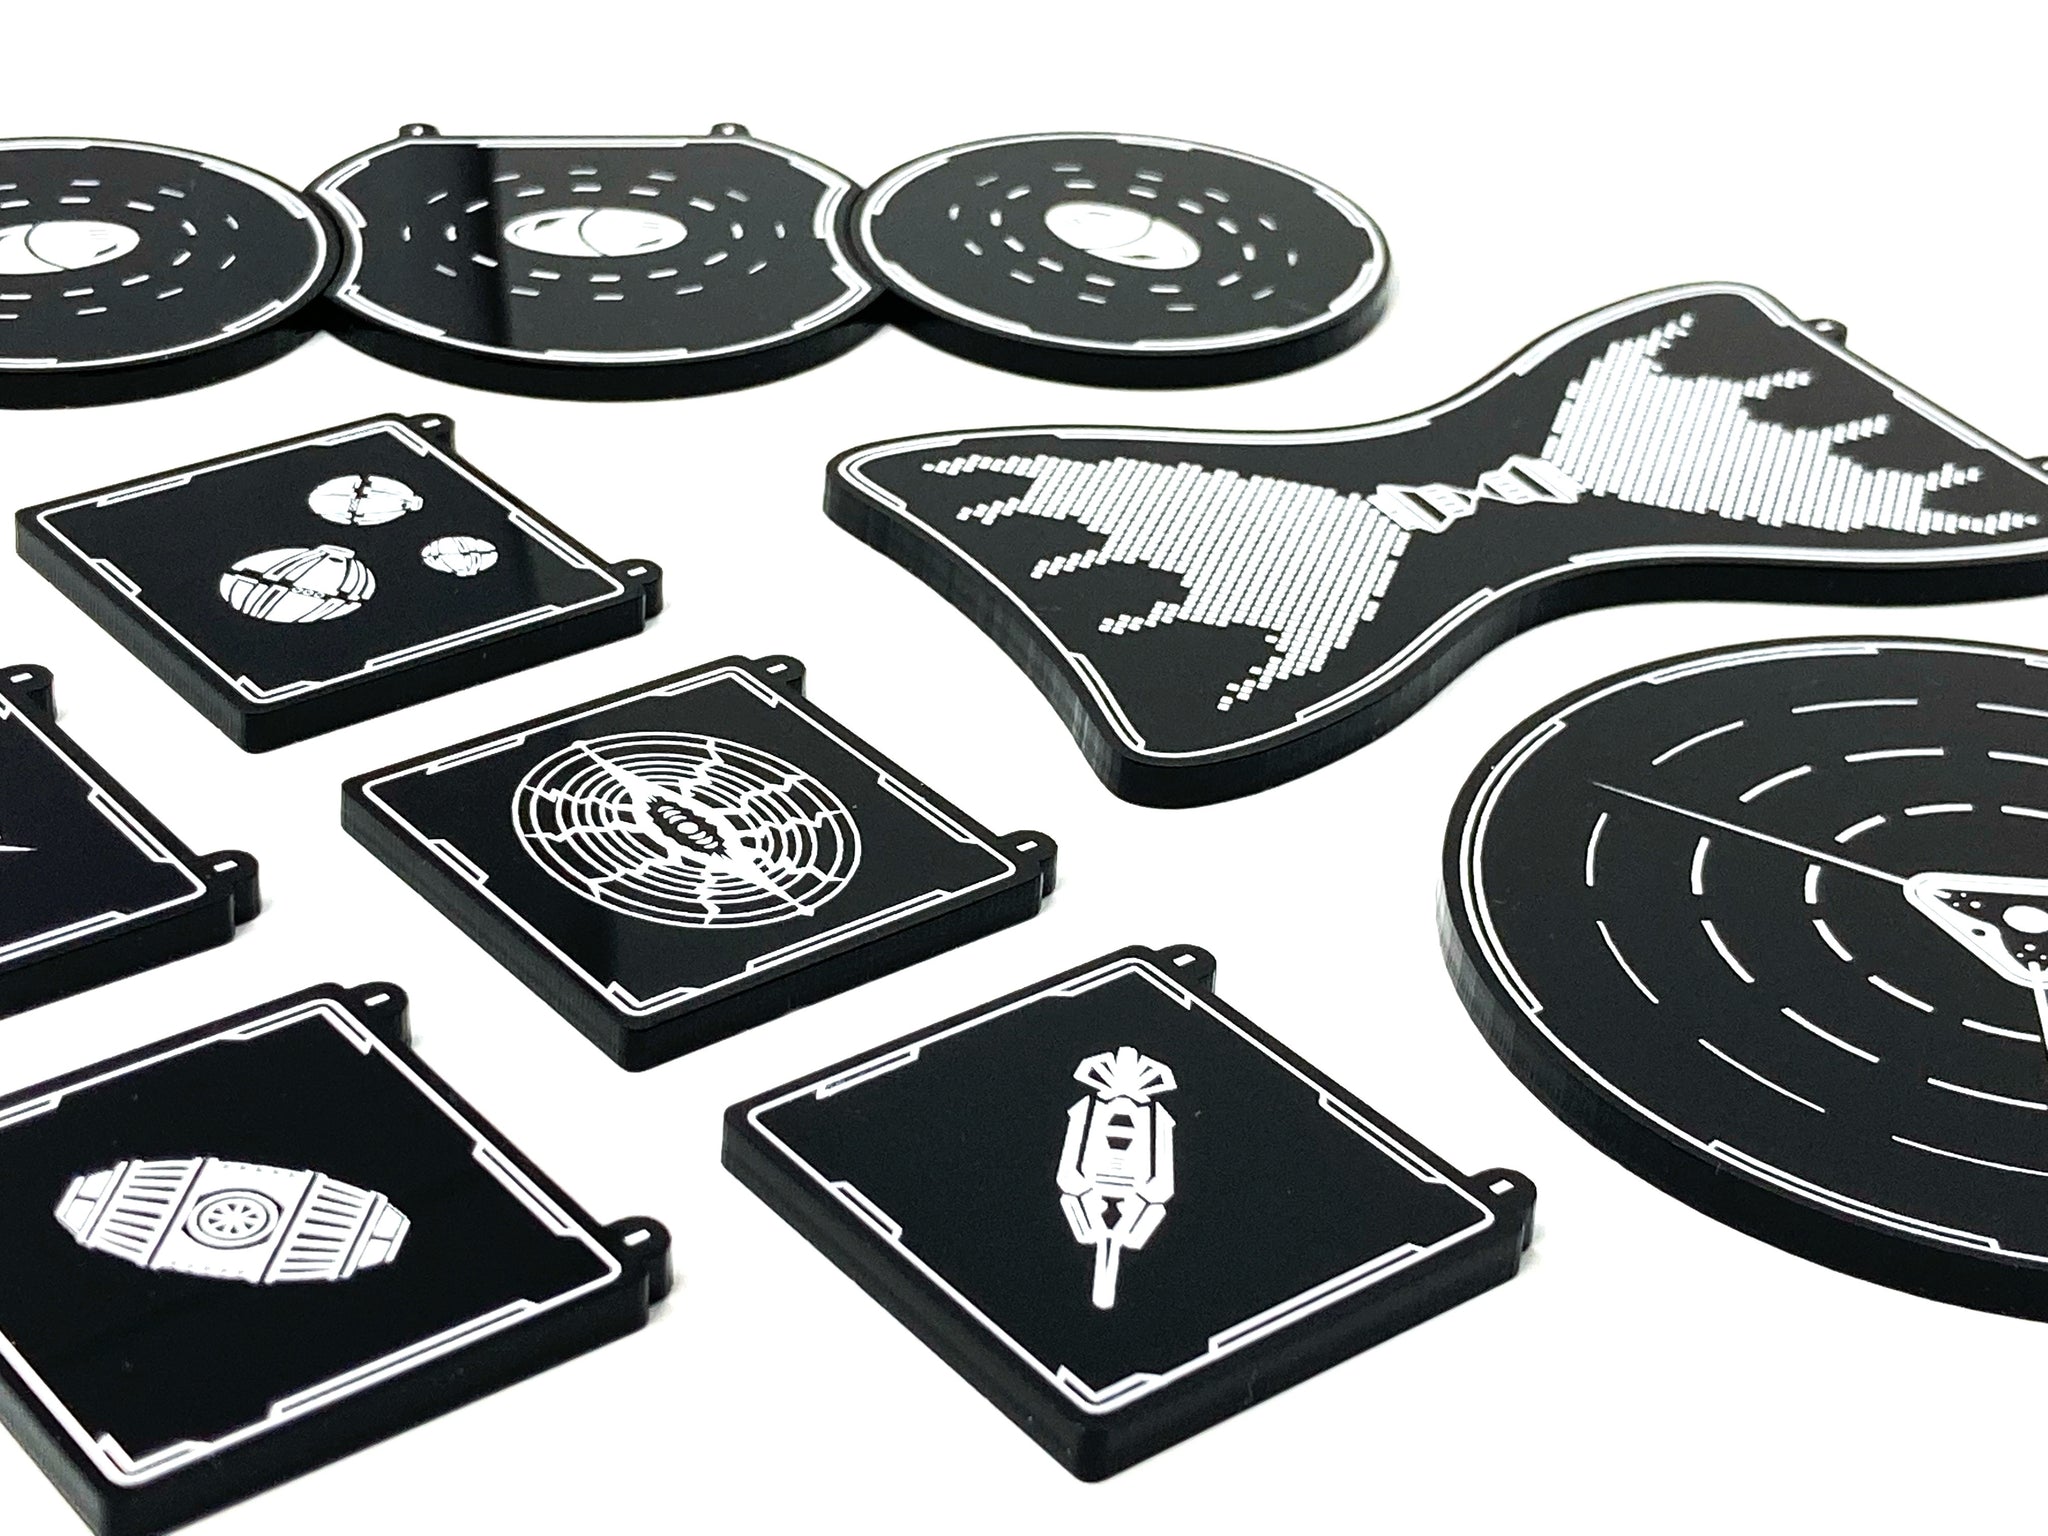 Bomb Token Set - Star Wars X-wing Compatible